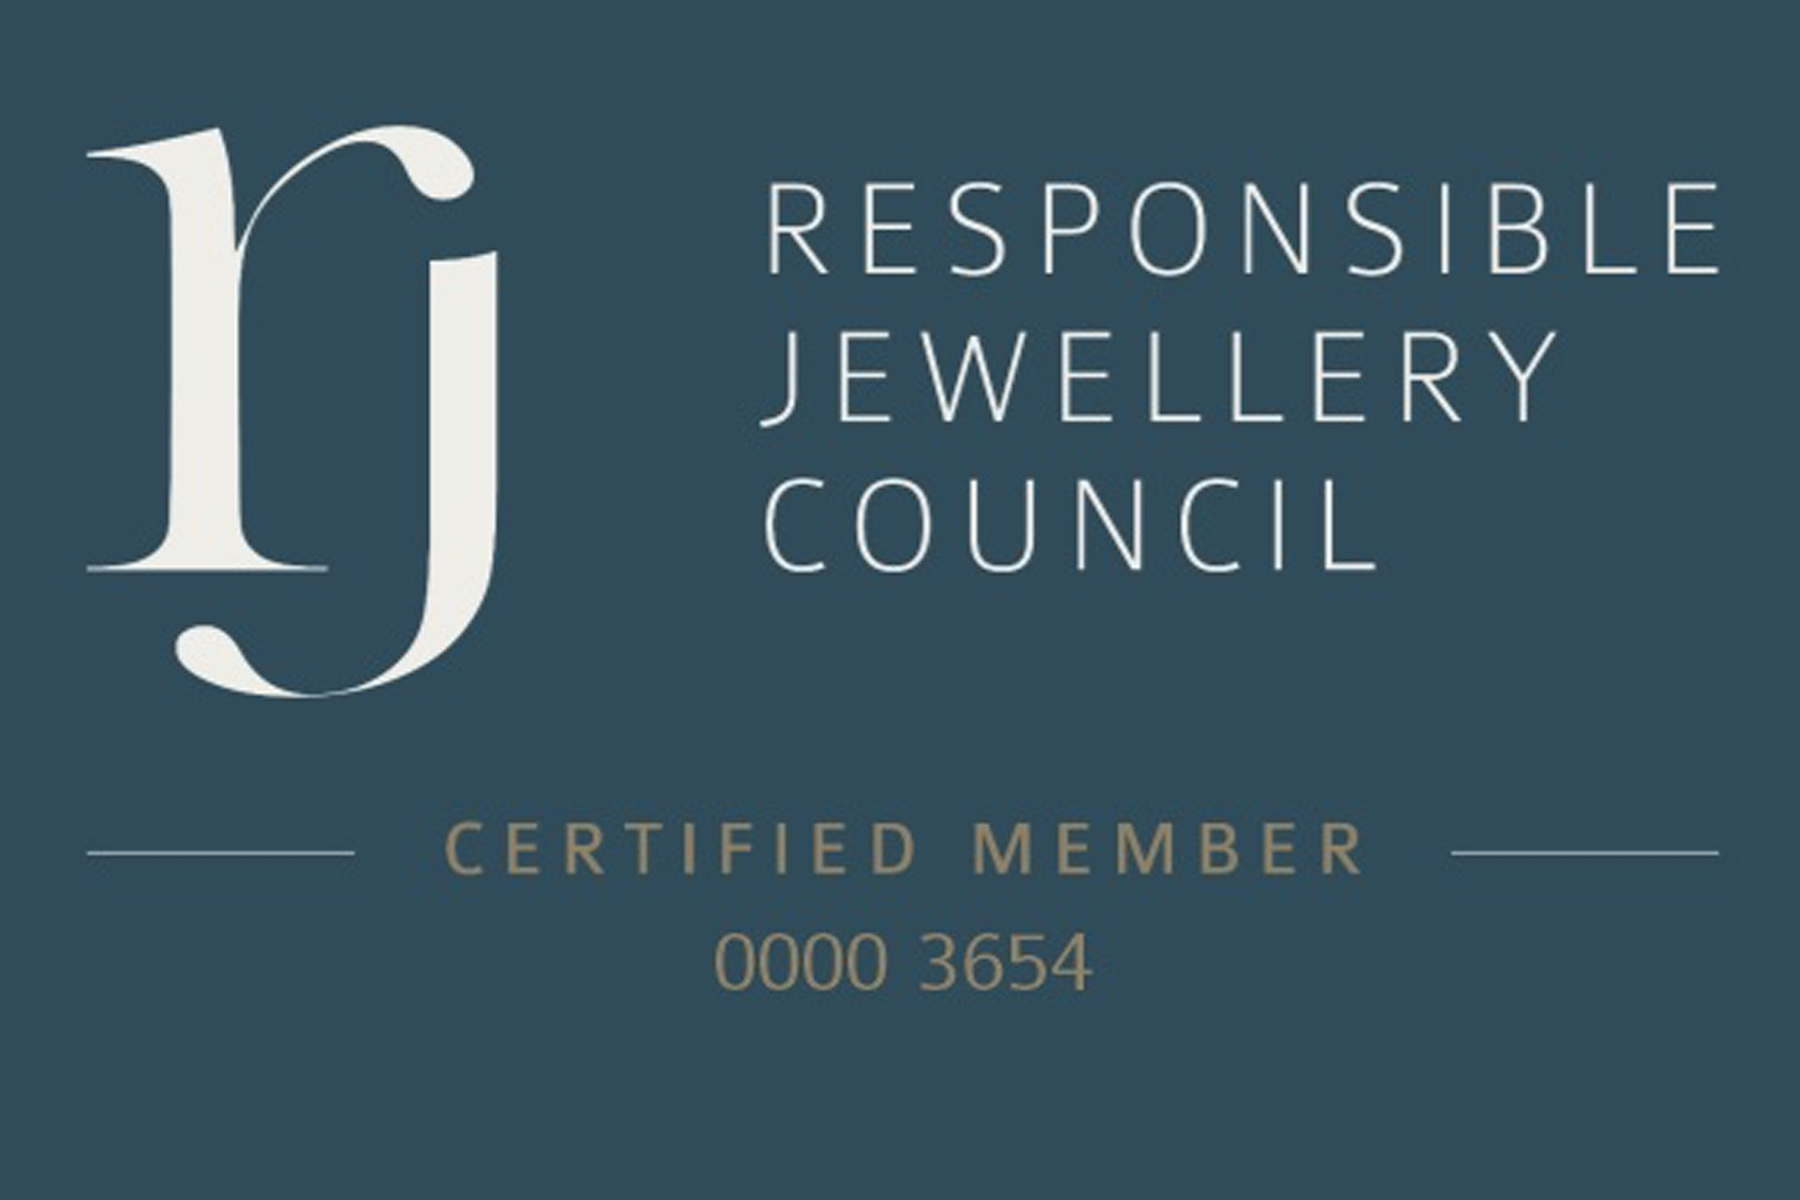 RJC - Responsible Jewellery Council